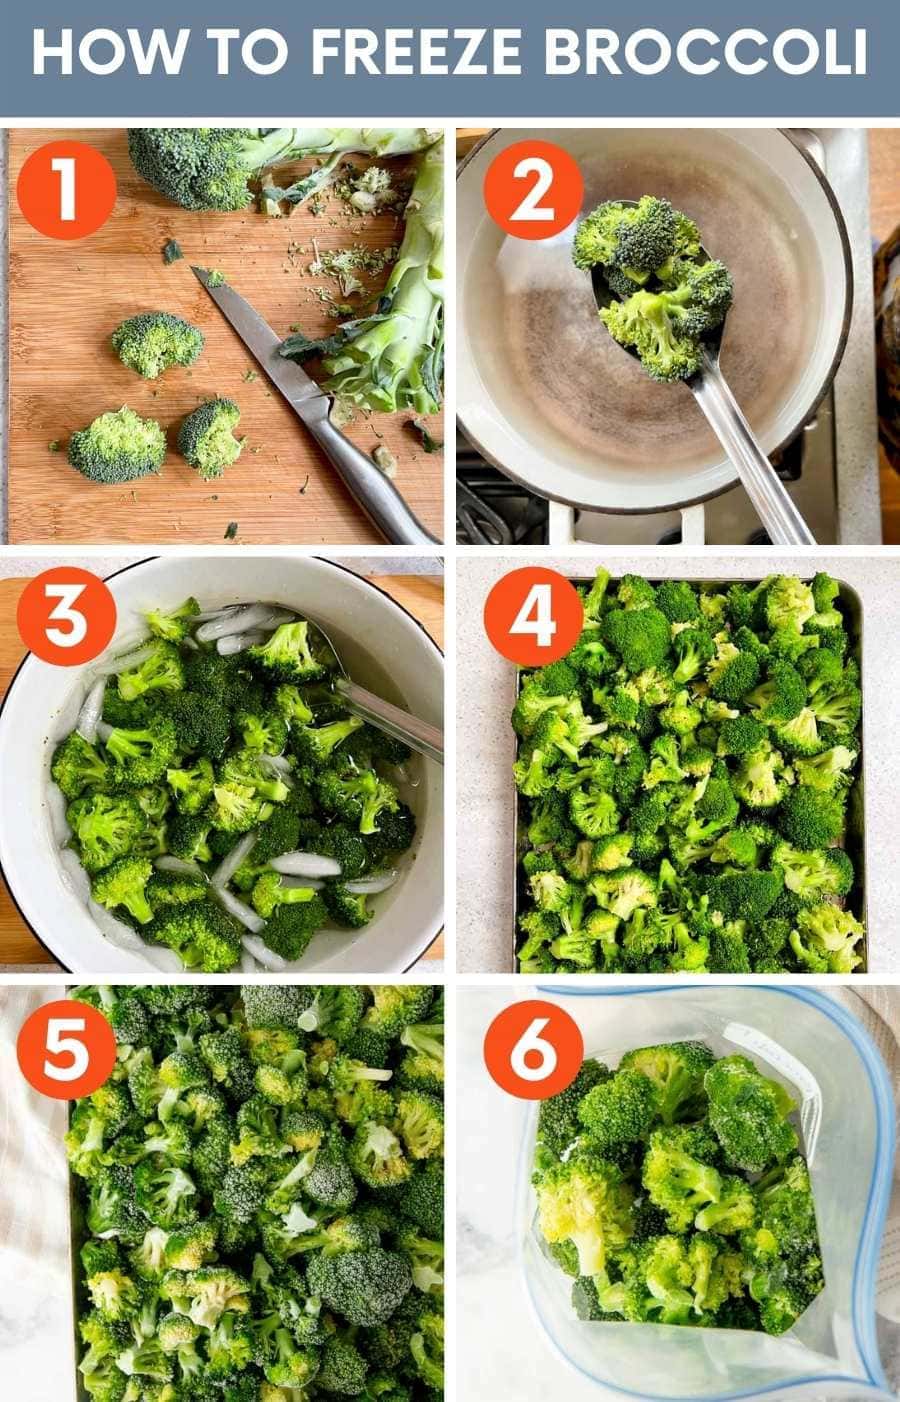 Collage of six steps to freezing broccoli.